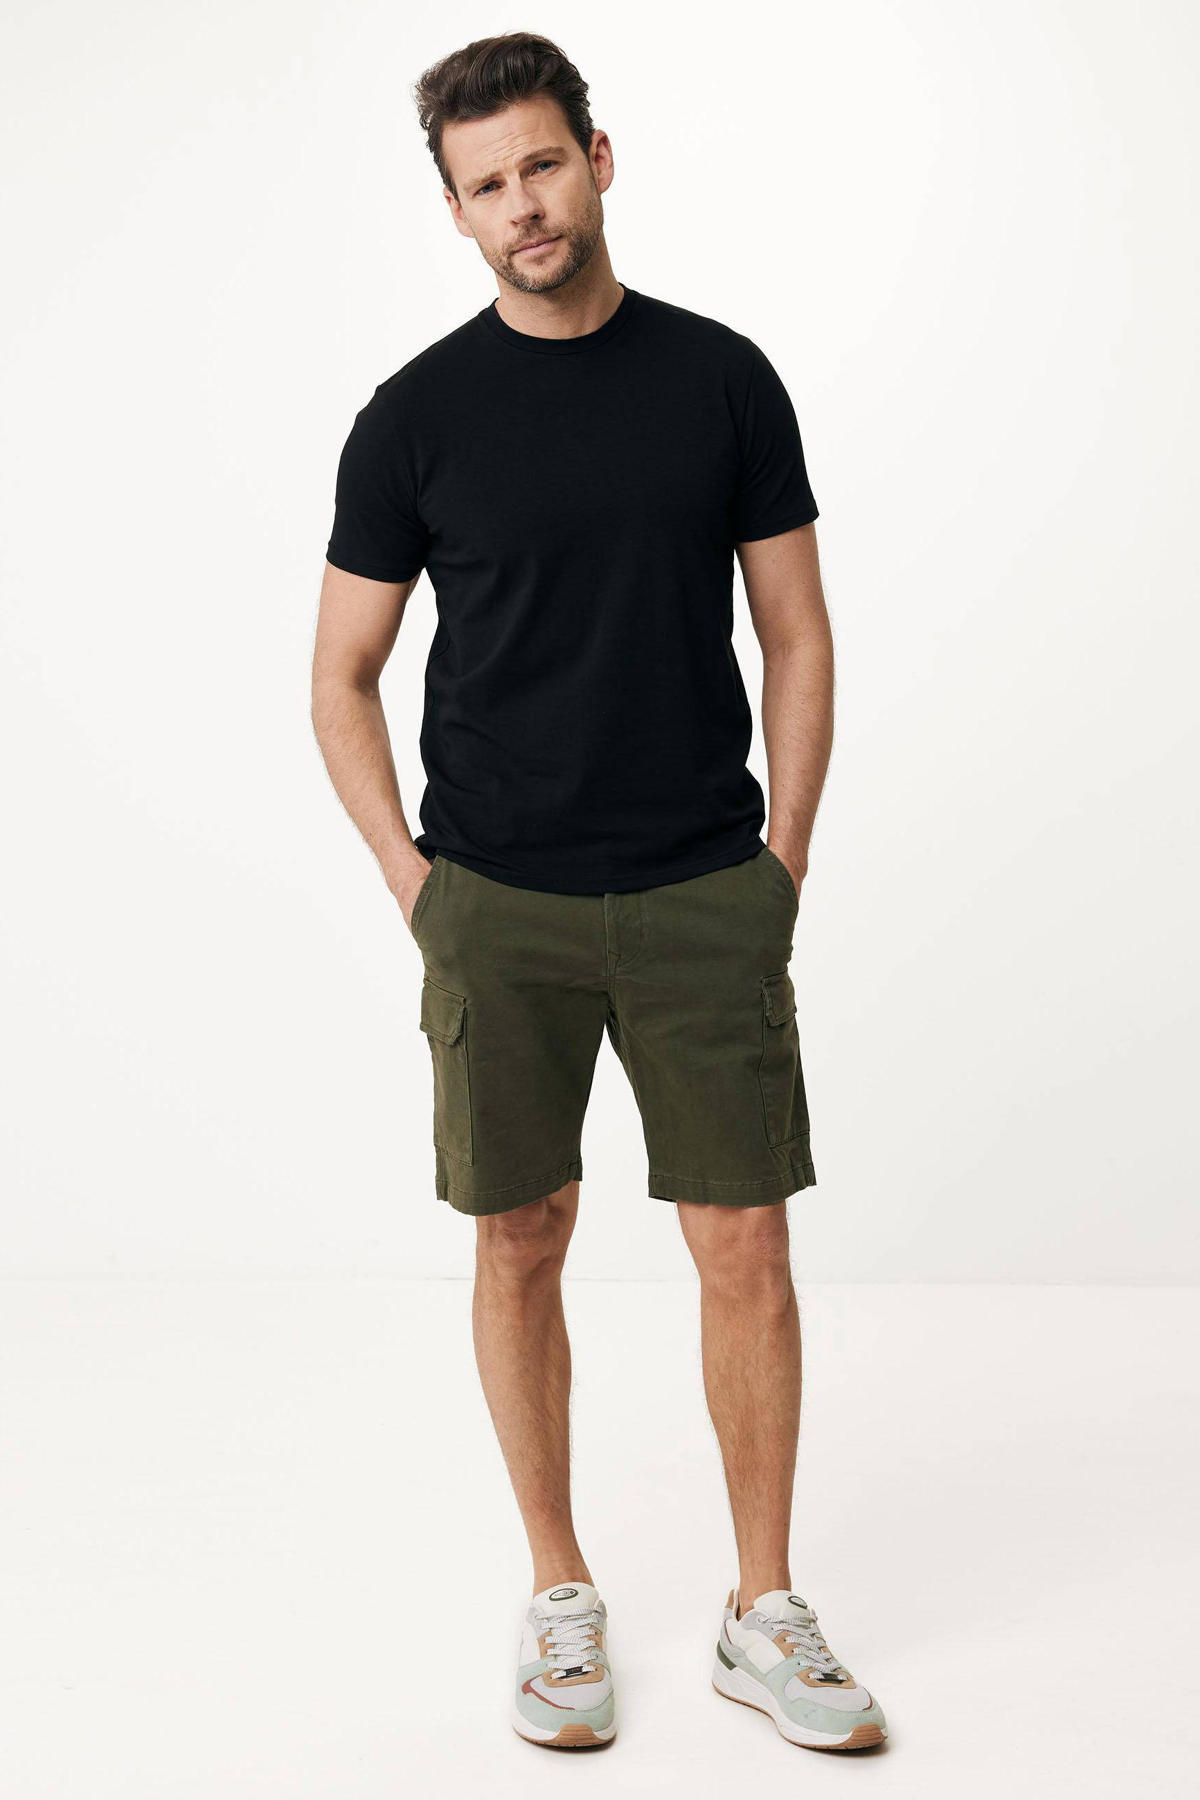 Mexx fit cargo short olive |